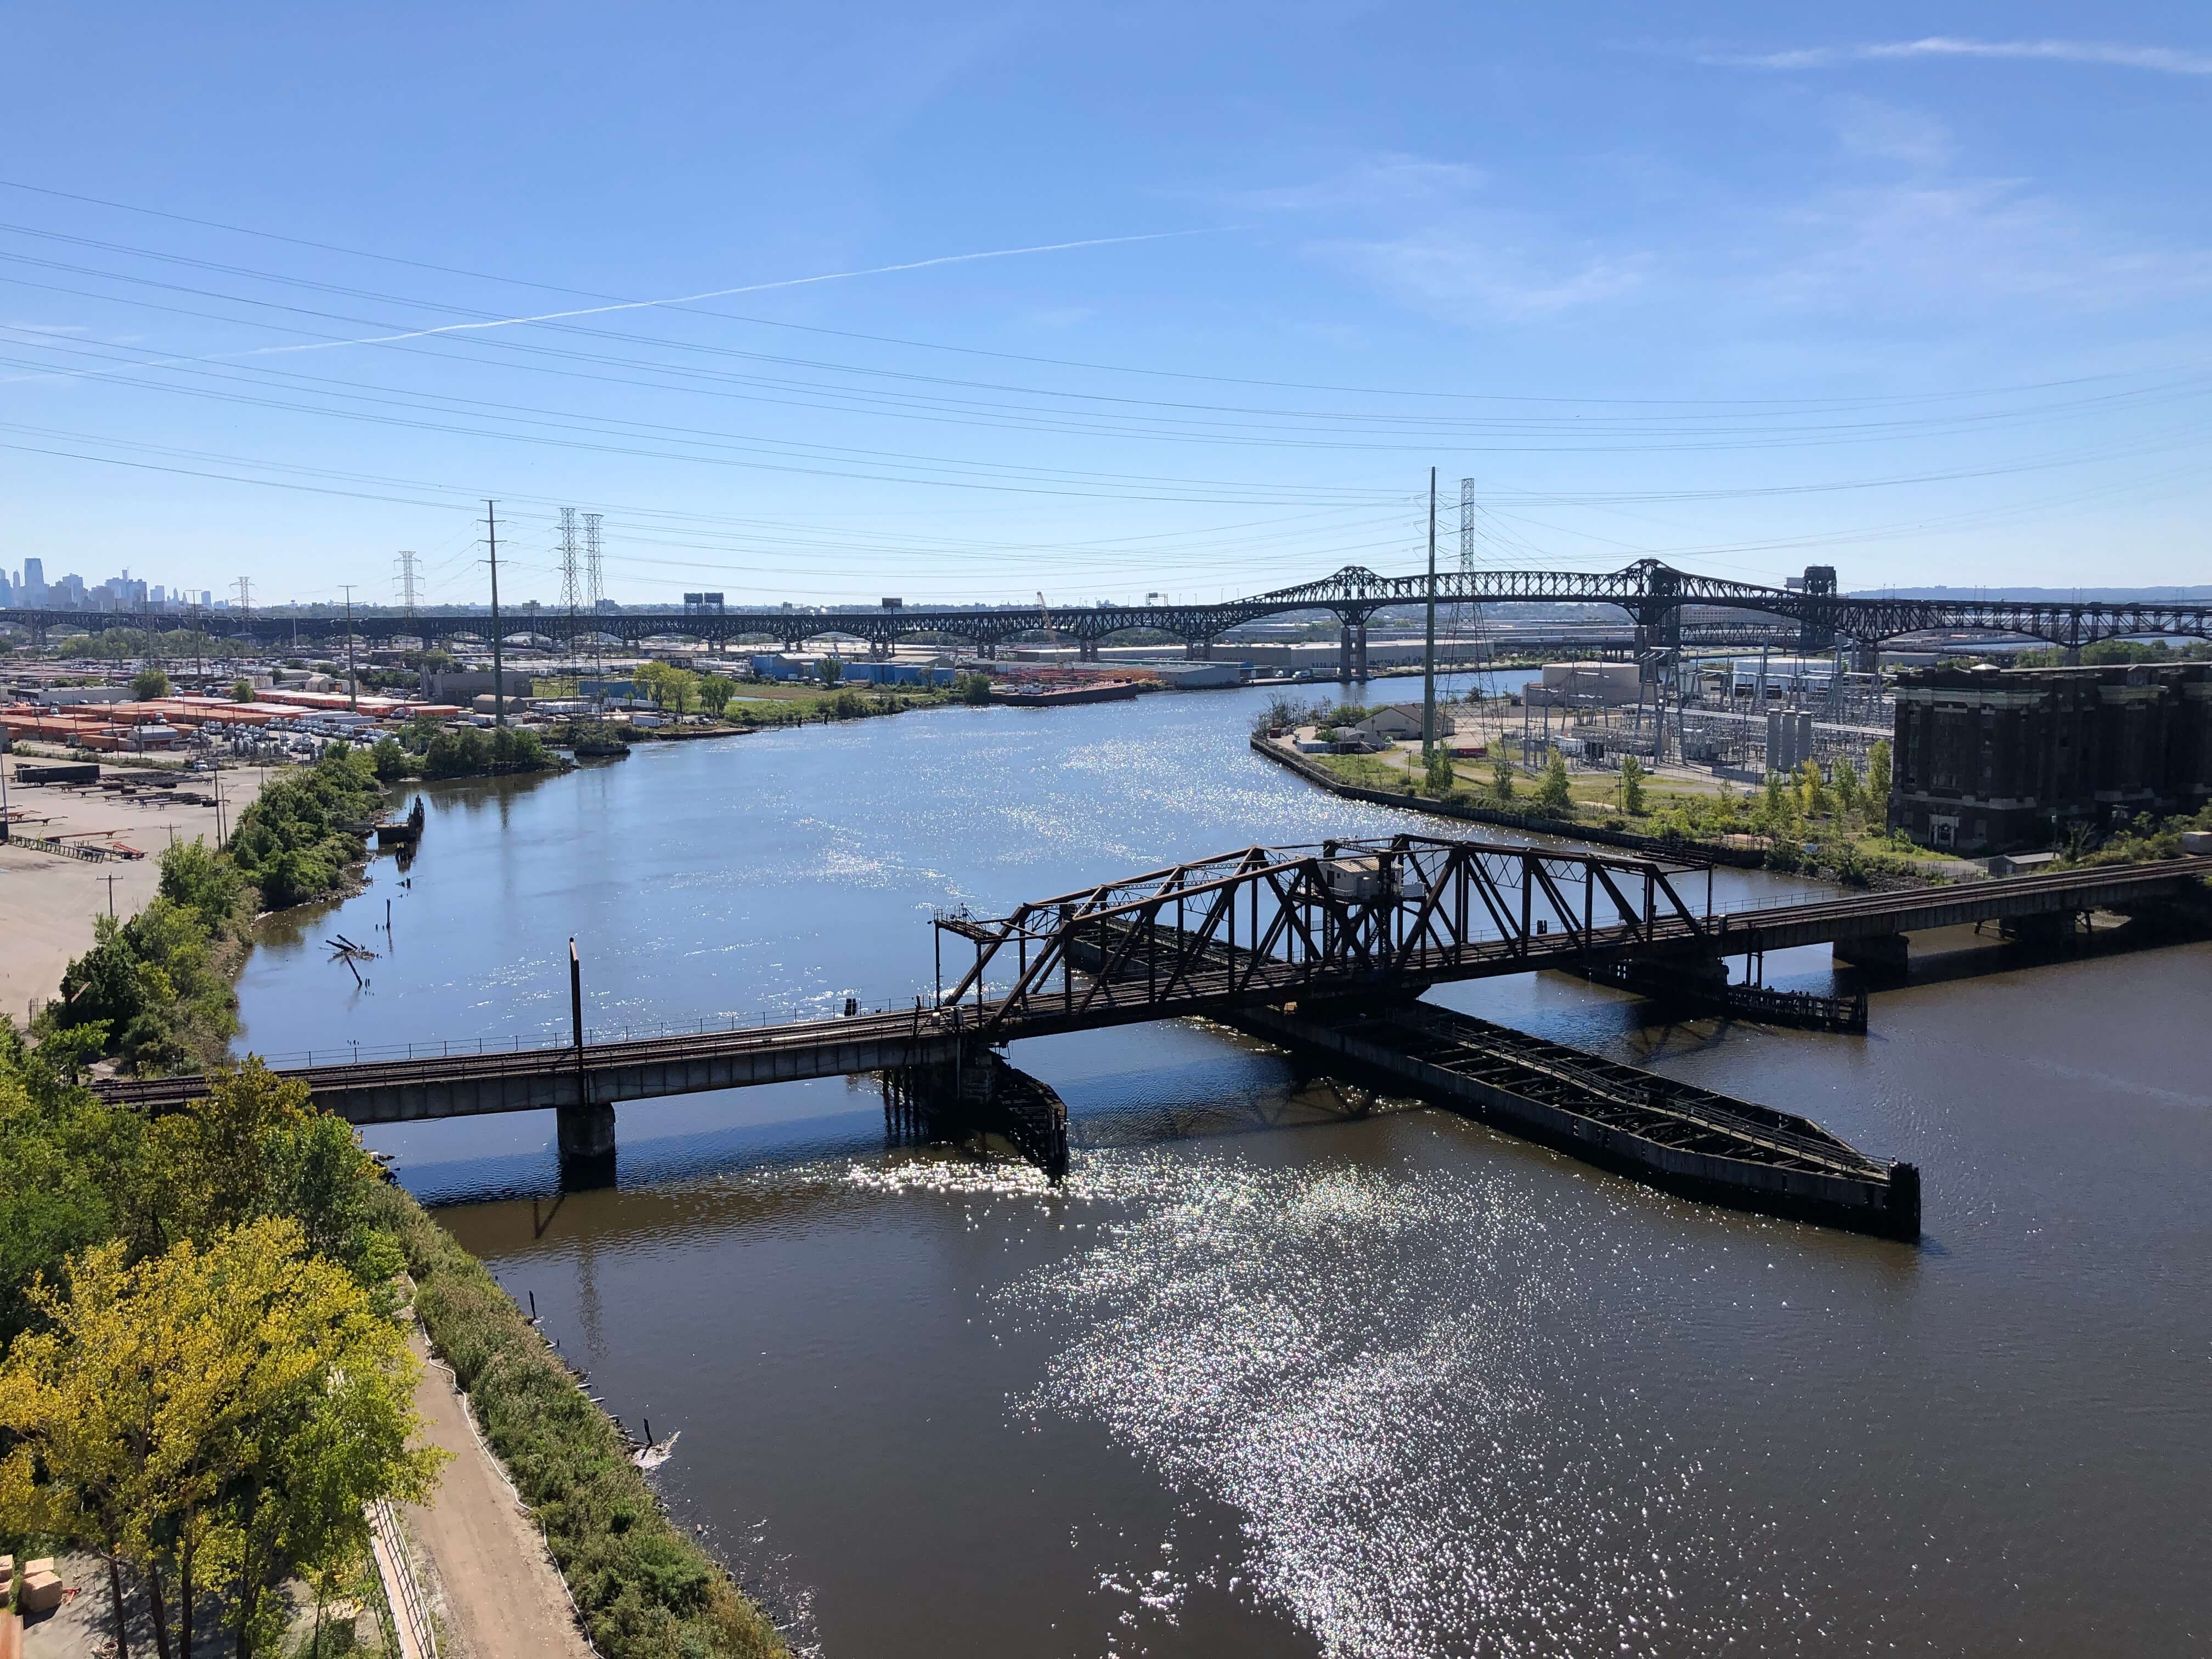 The old Point-no-Point swint-type railroad bridge is visible in the foreground over the Passaic River in Newark, New Jersey.